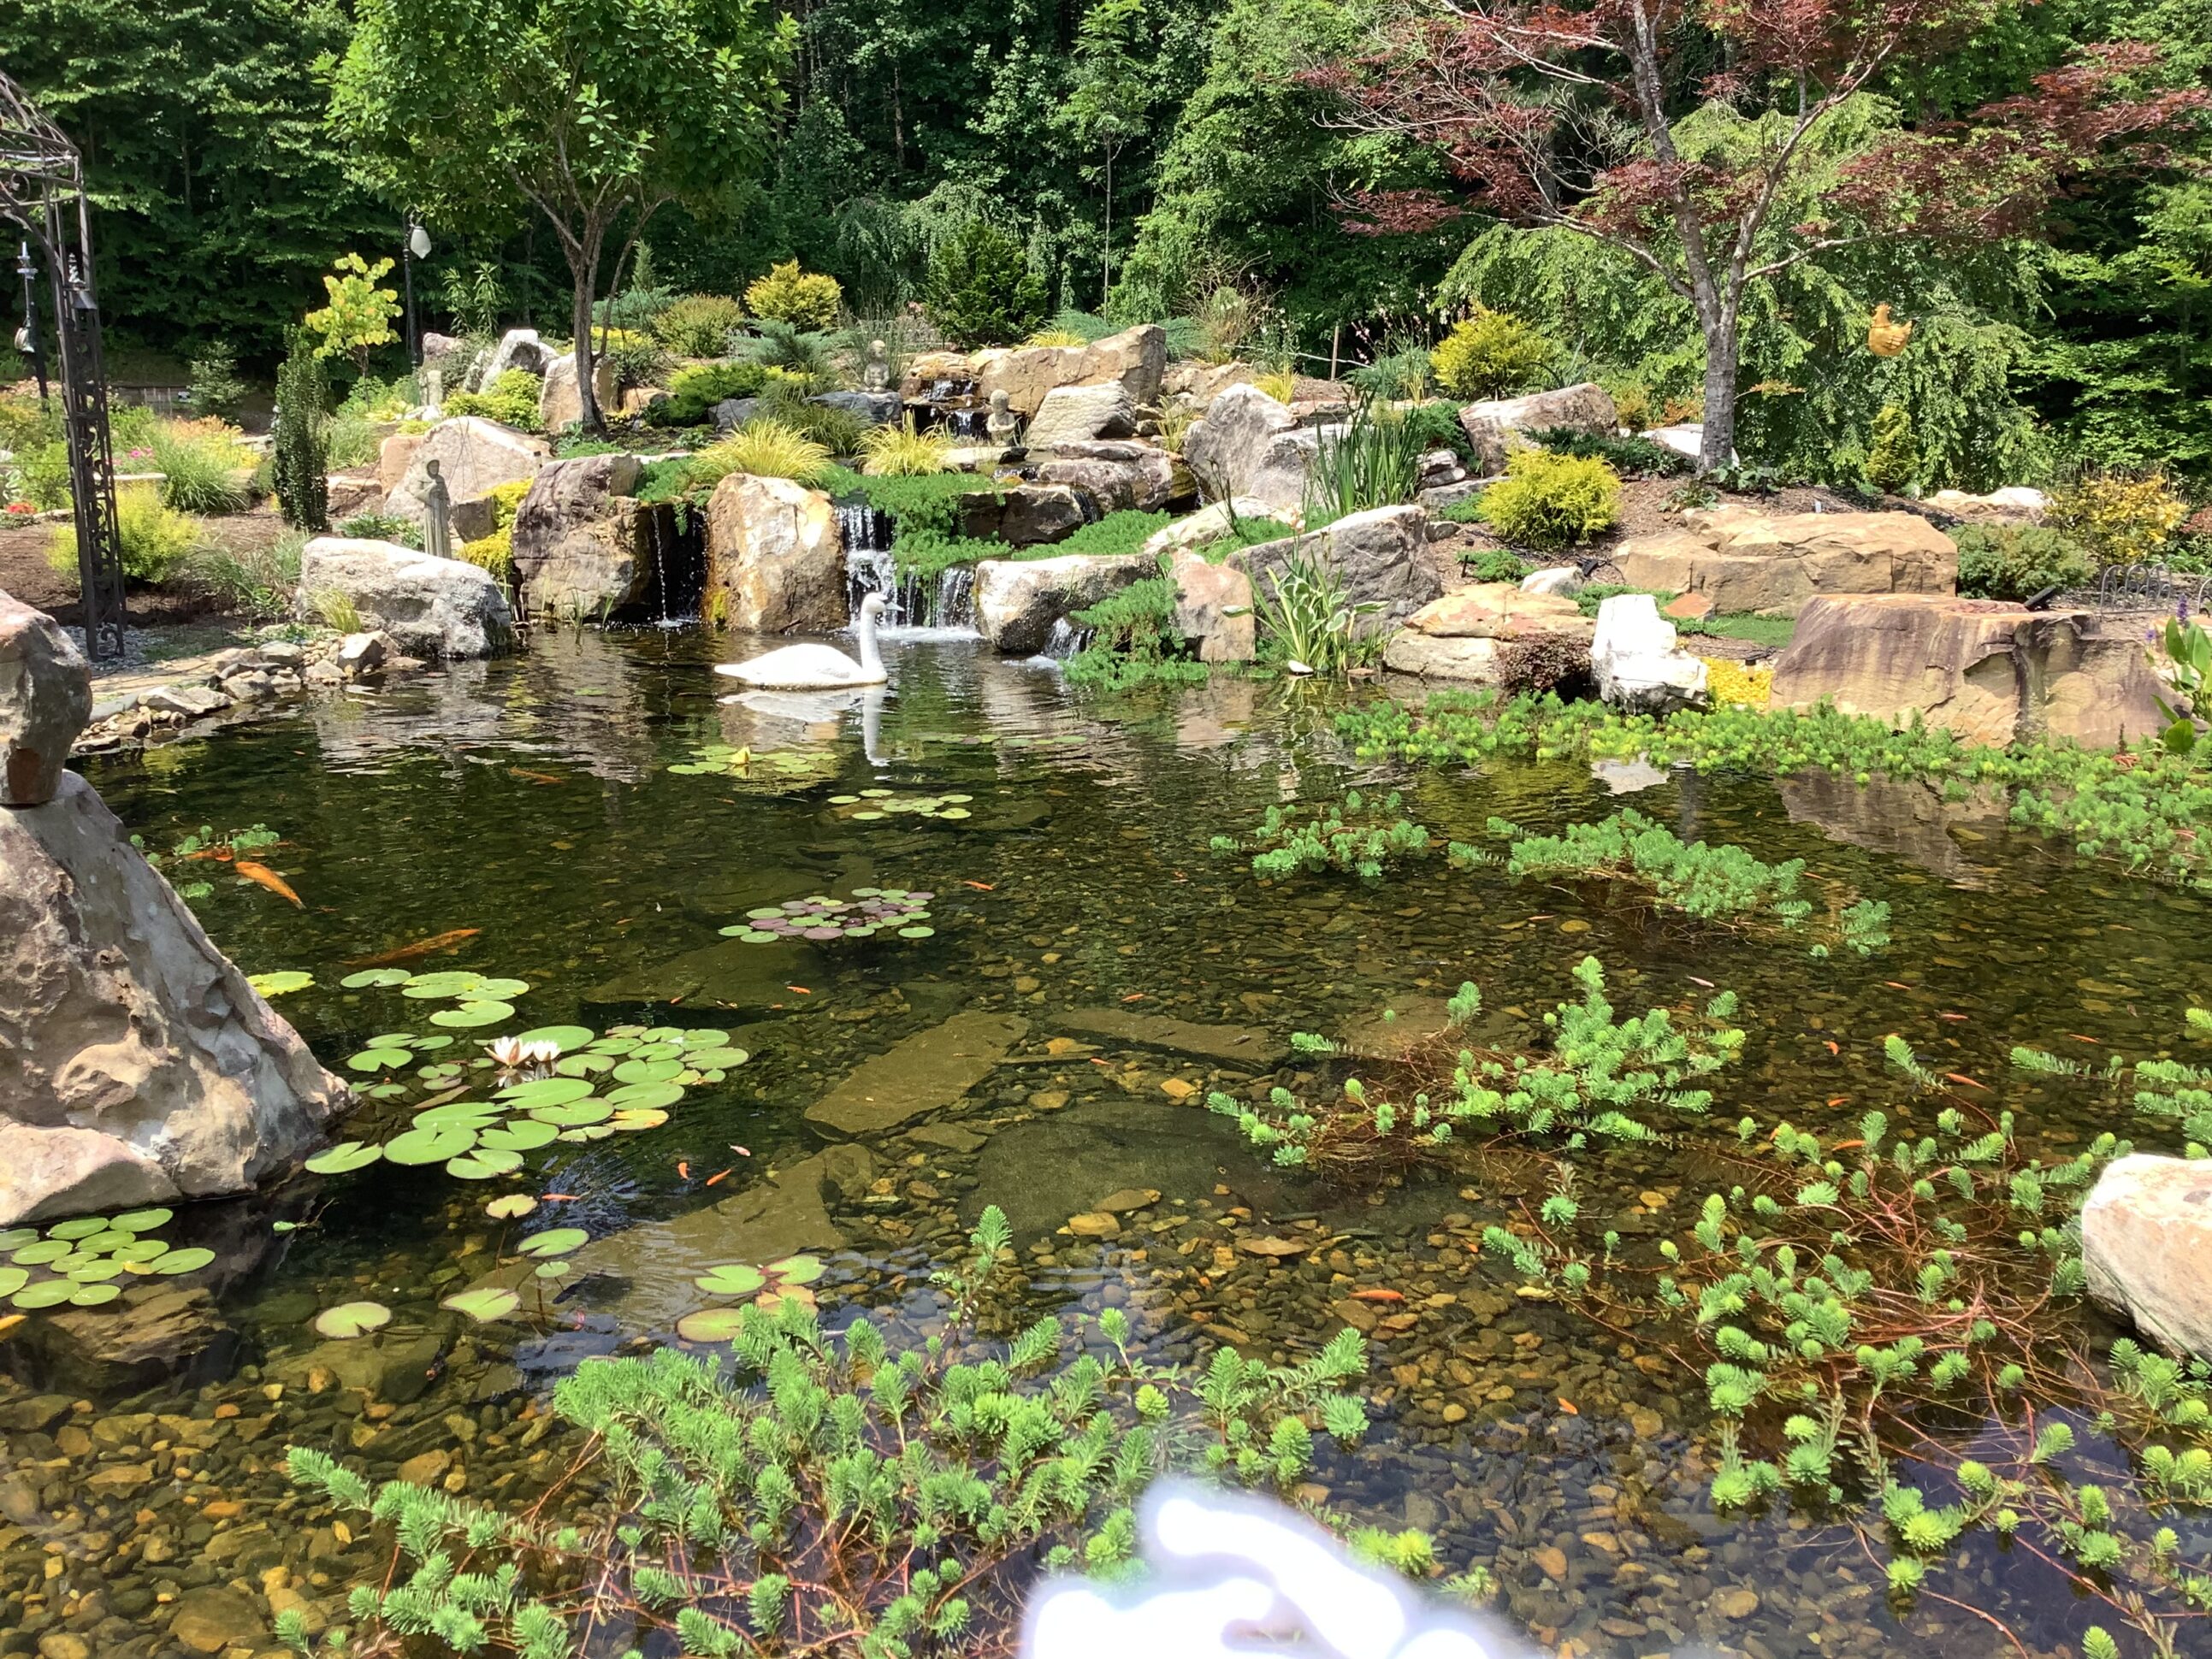 A pond with water lilies and rocks in the background.